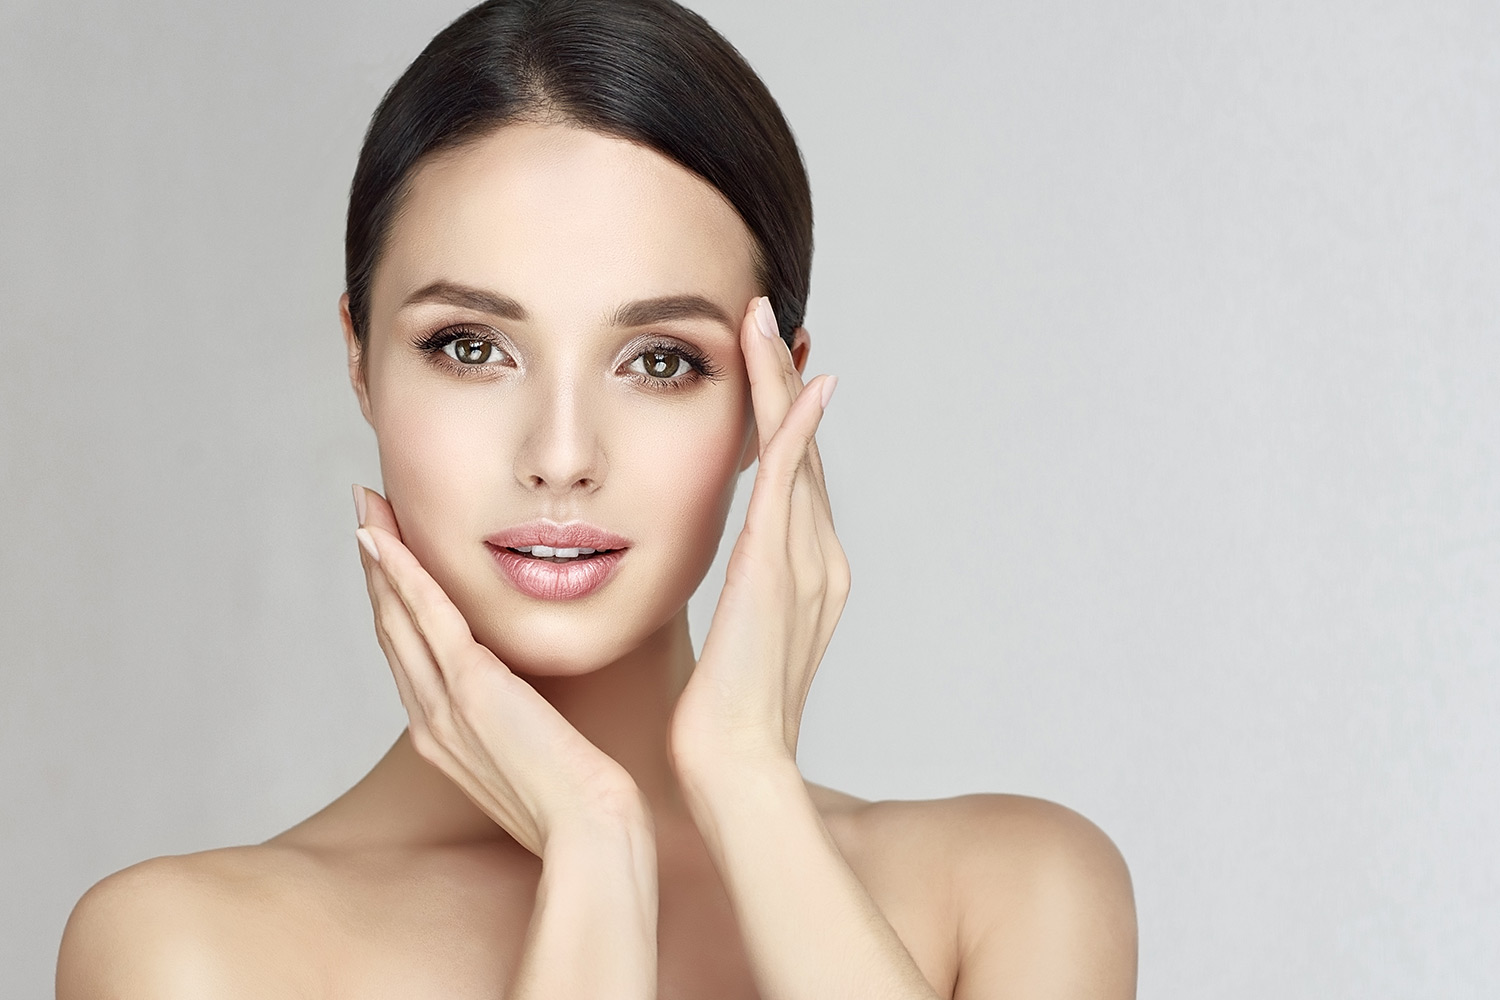 Non-surgical Face lift with ULTRAFORMER. 